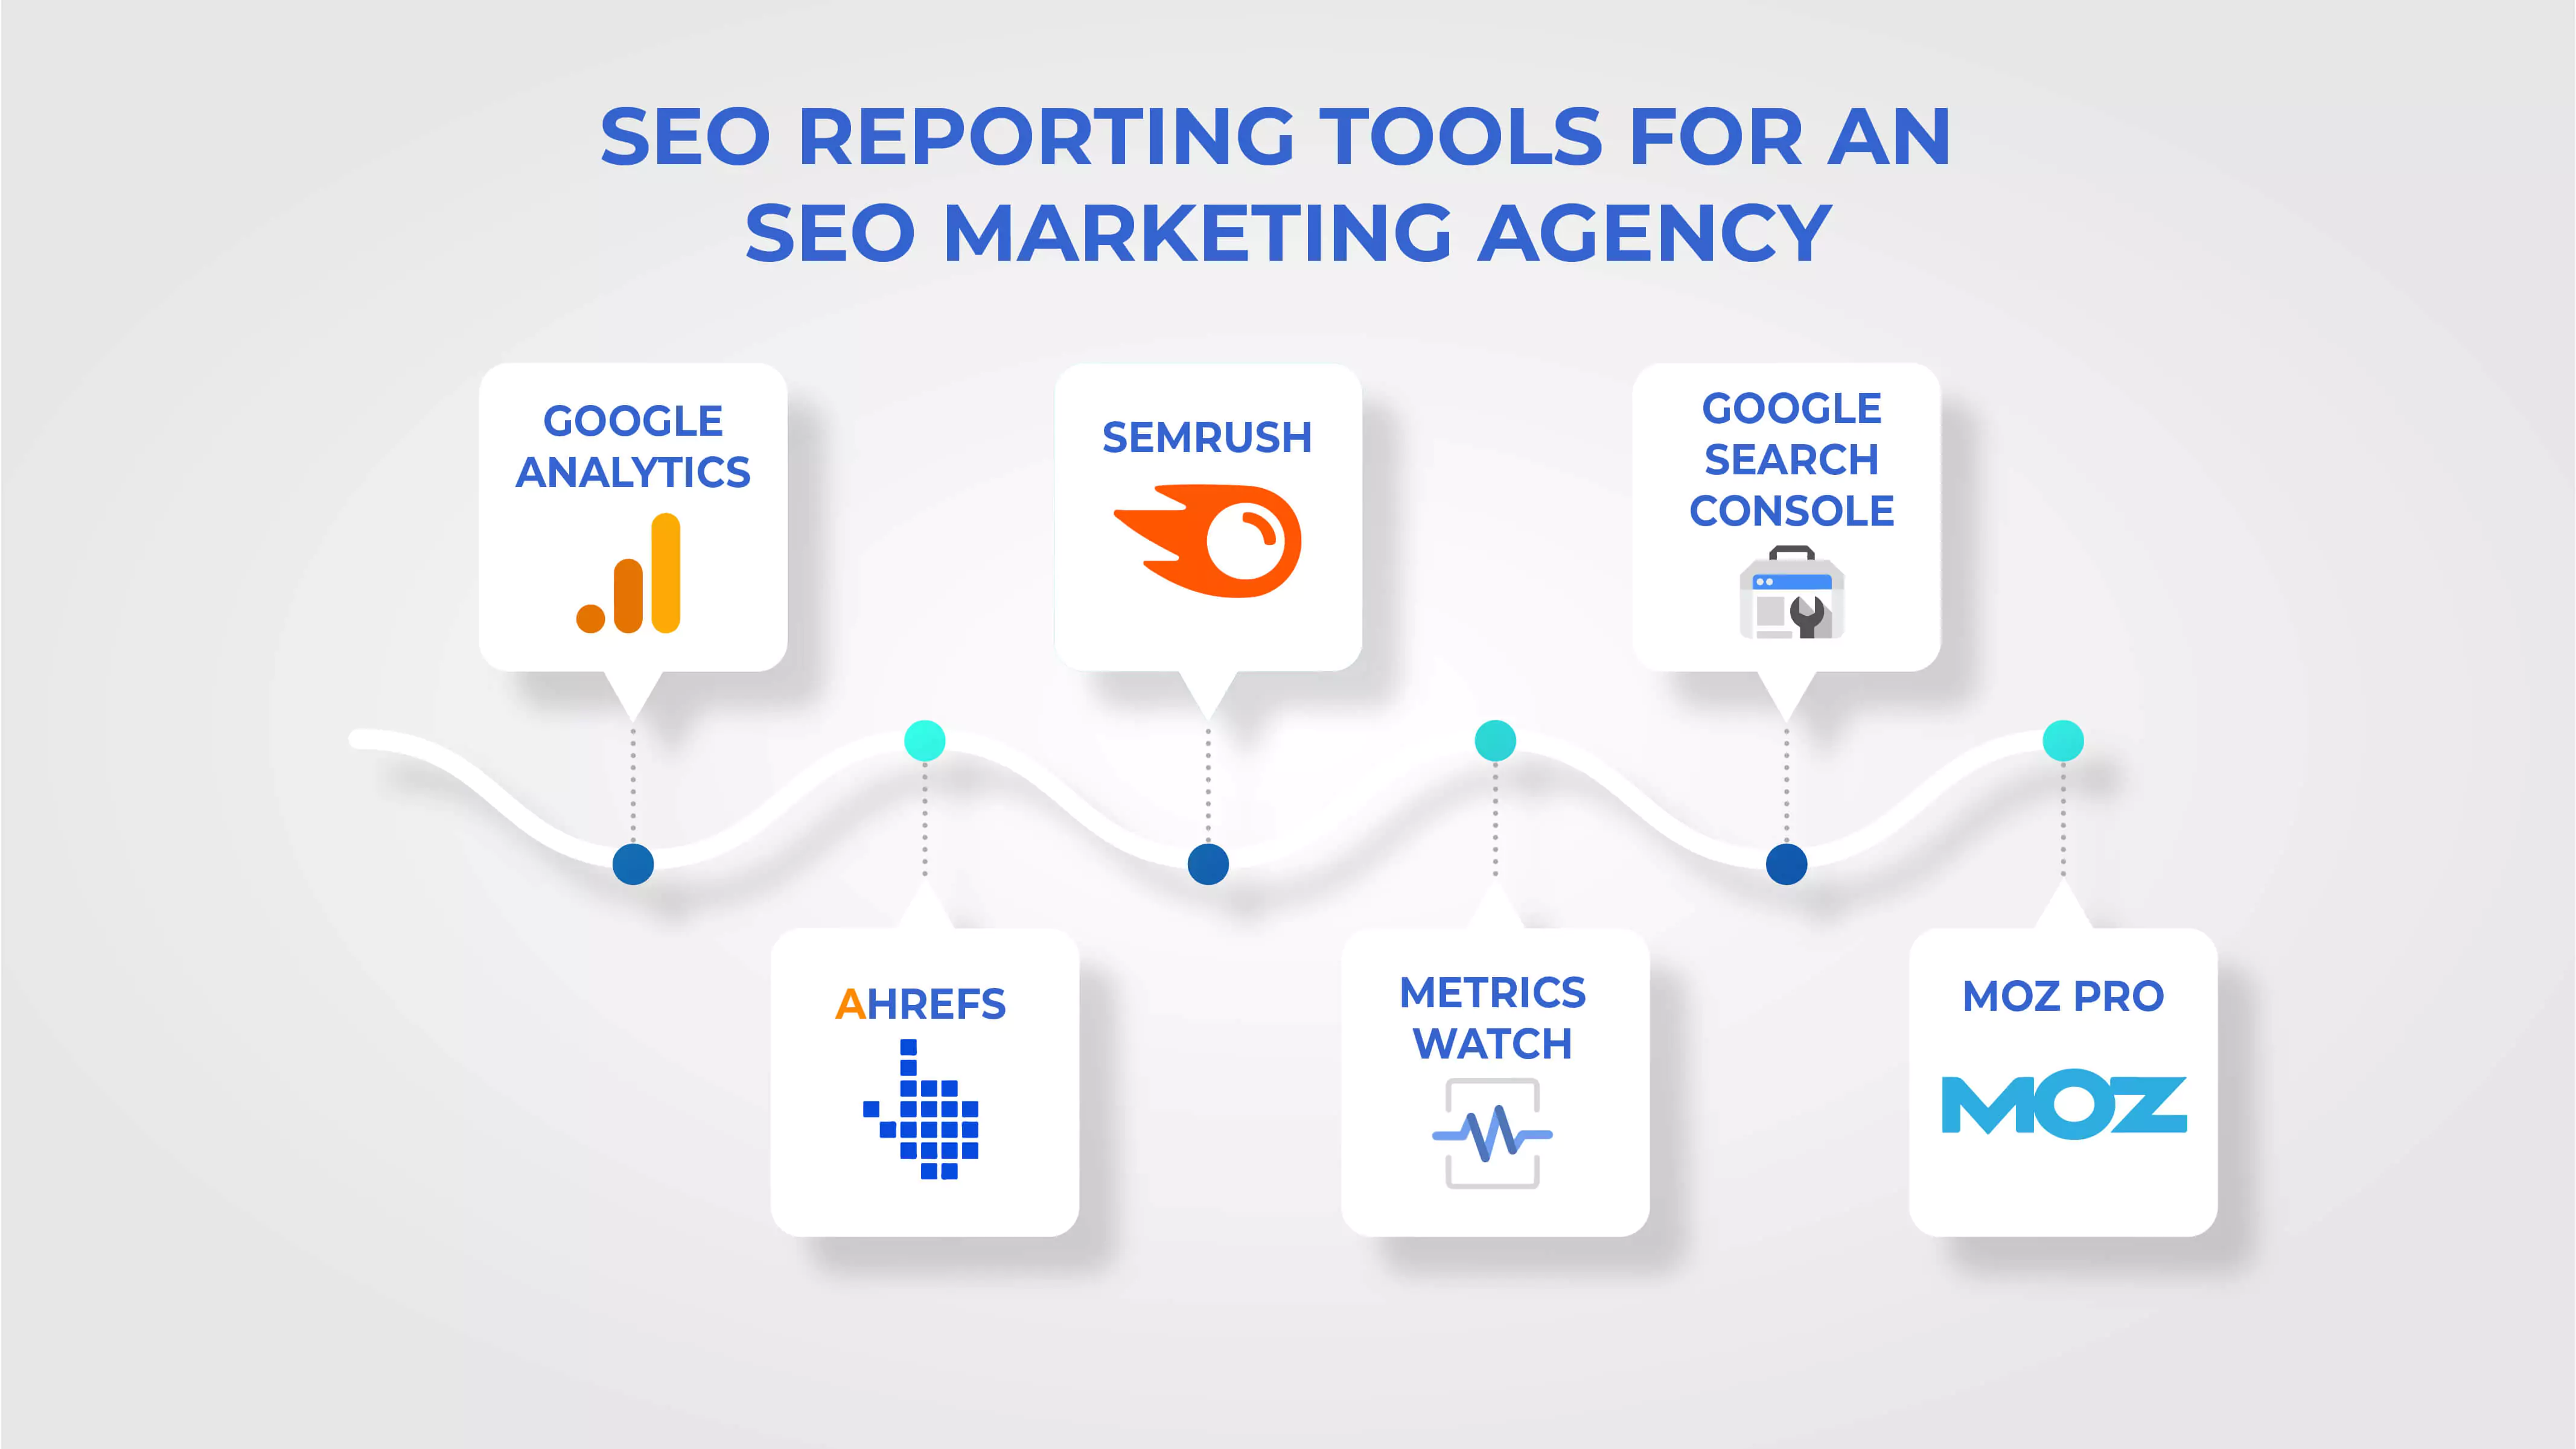 SEO Reporting Tools For An SEO Marketing Agency